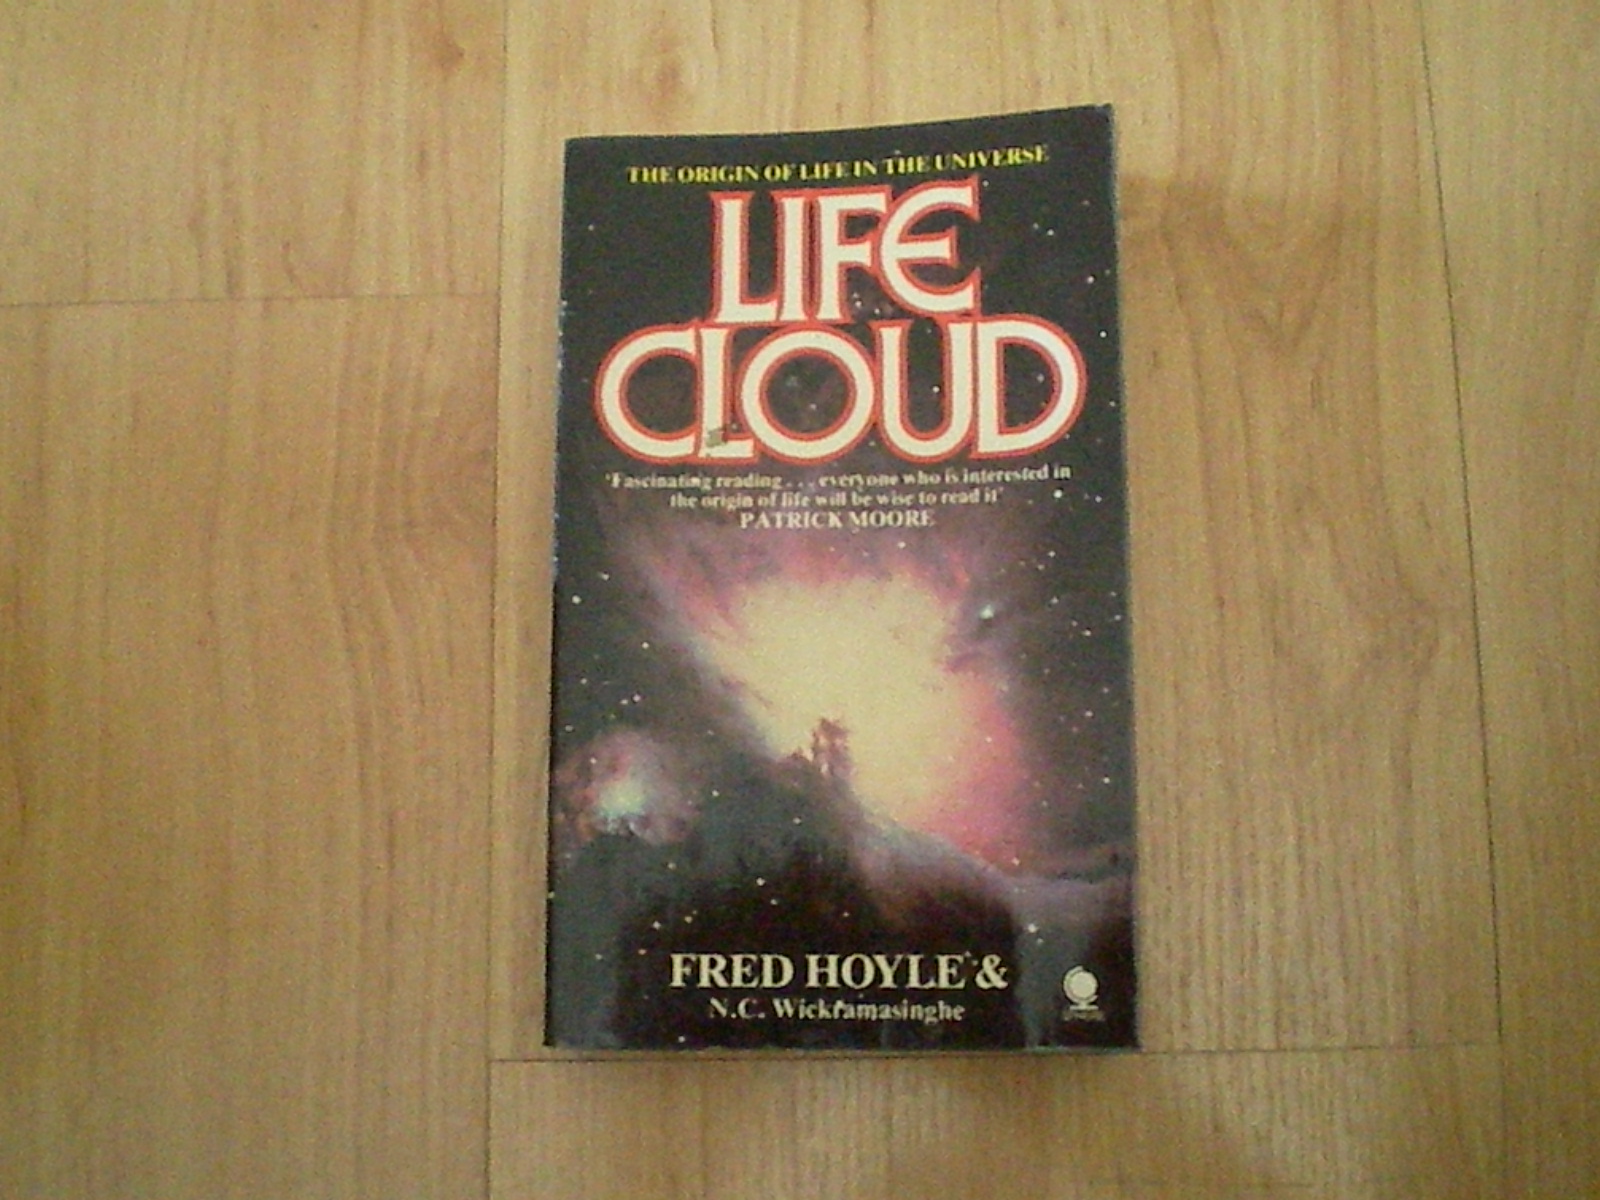 Lifecloud, the origin of life in the universe